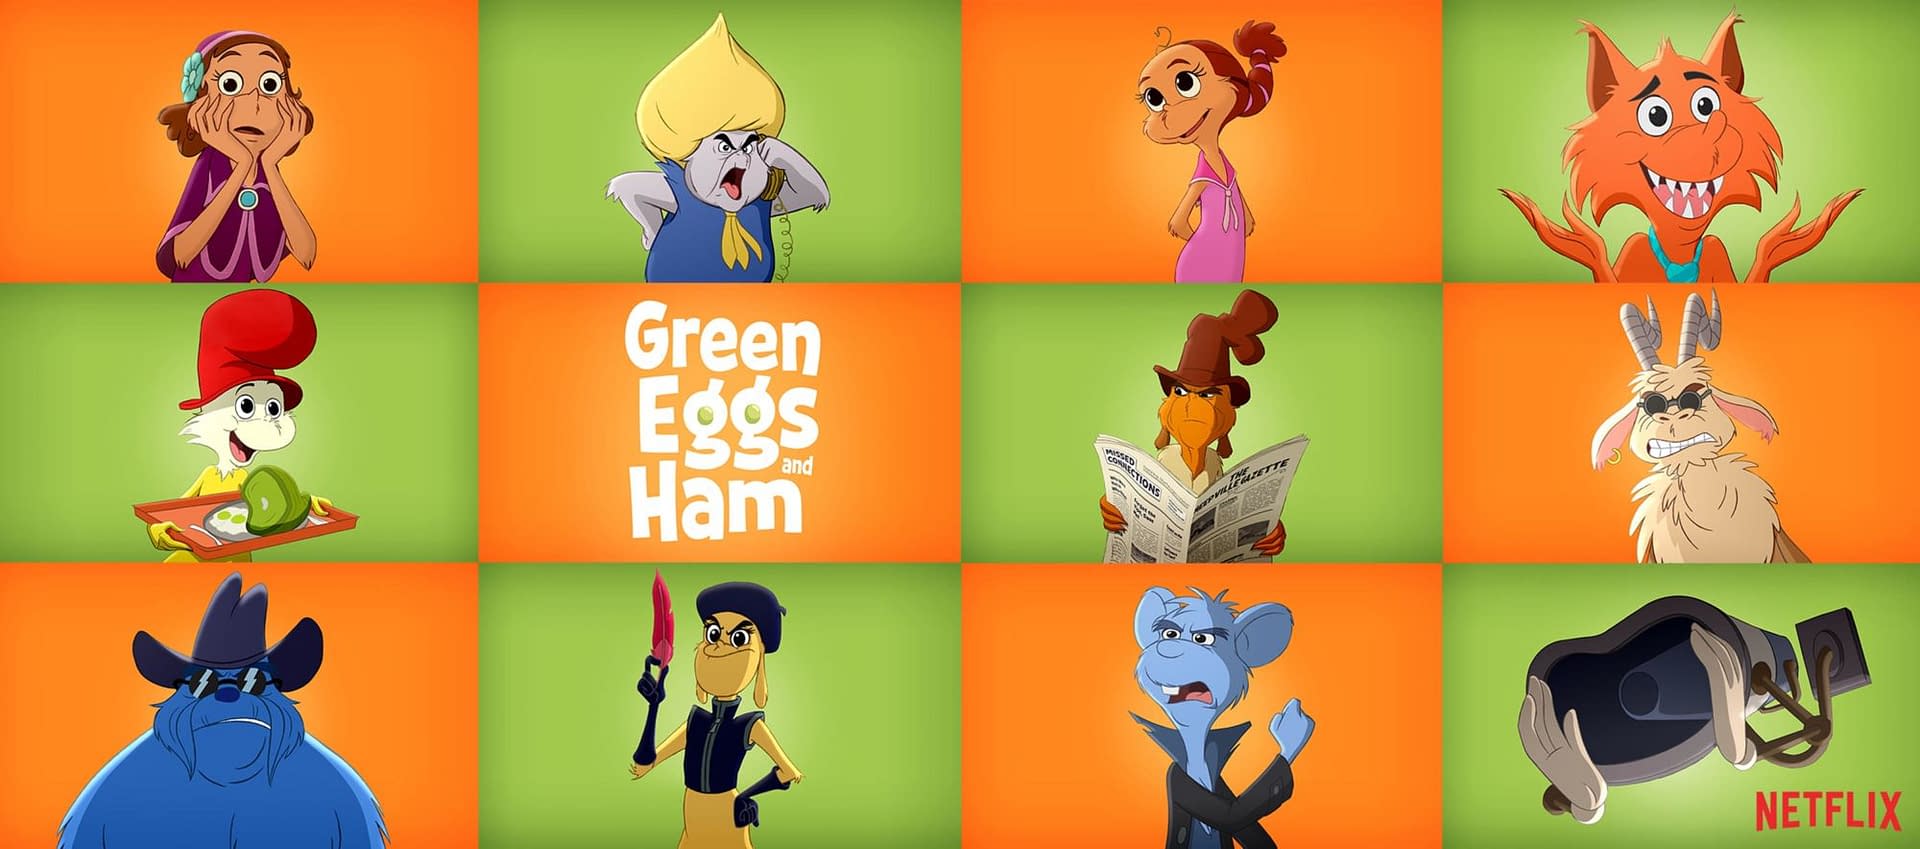 'Green Eggs and Ham' Netflix's Animated Series Sets Teaser, Voice Cast